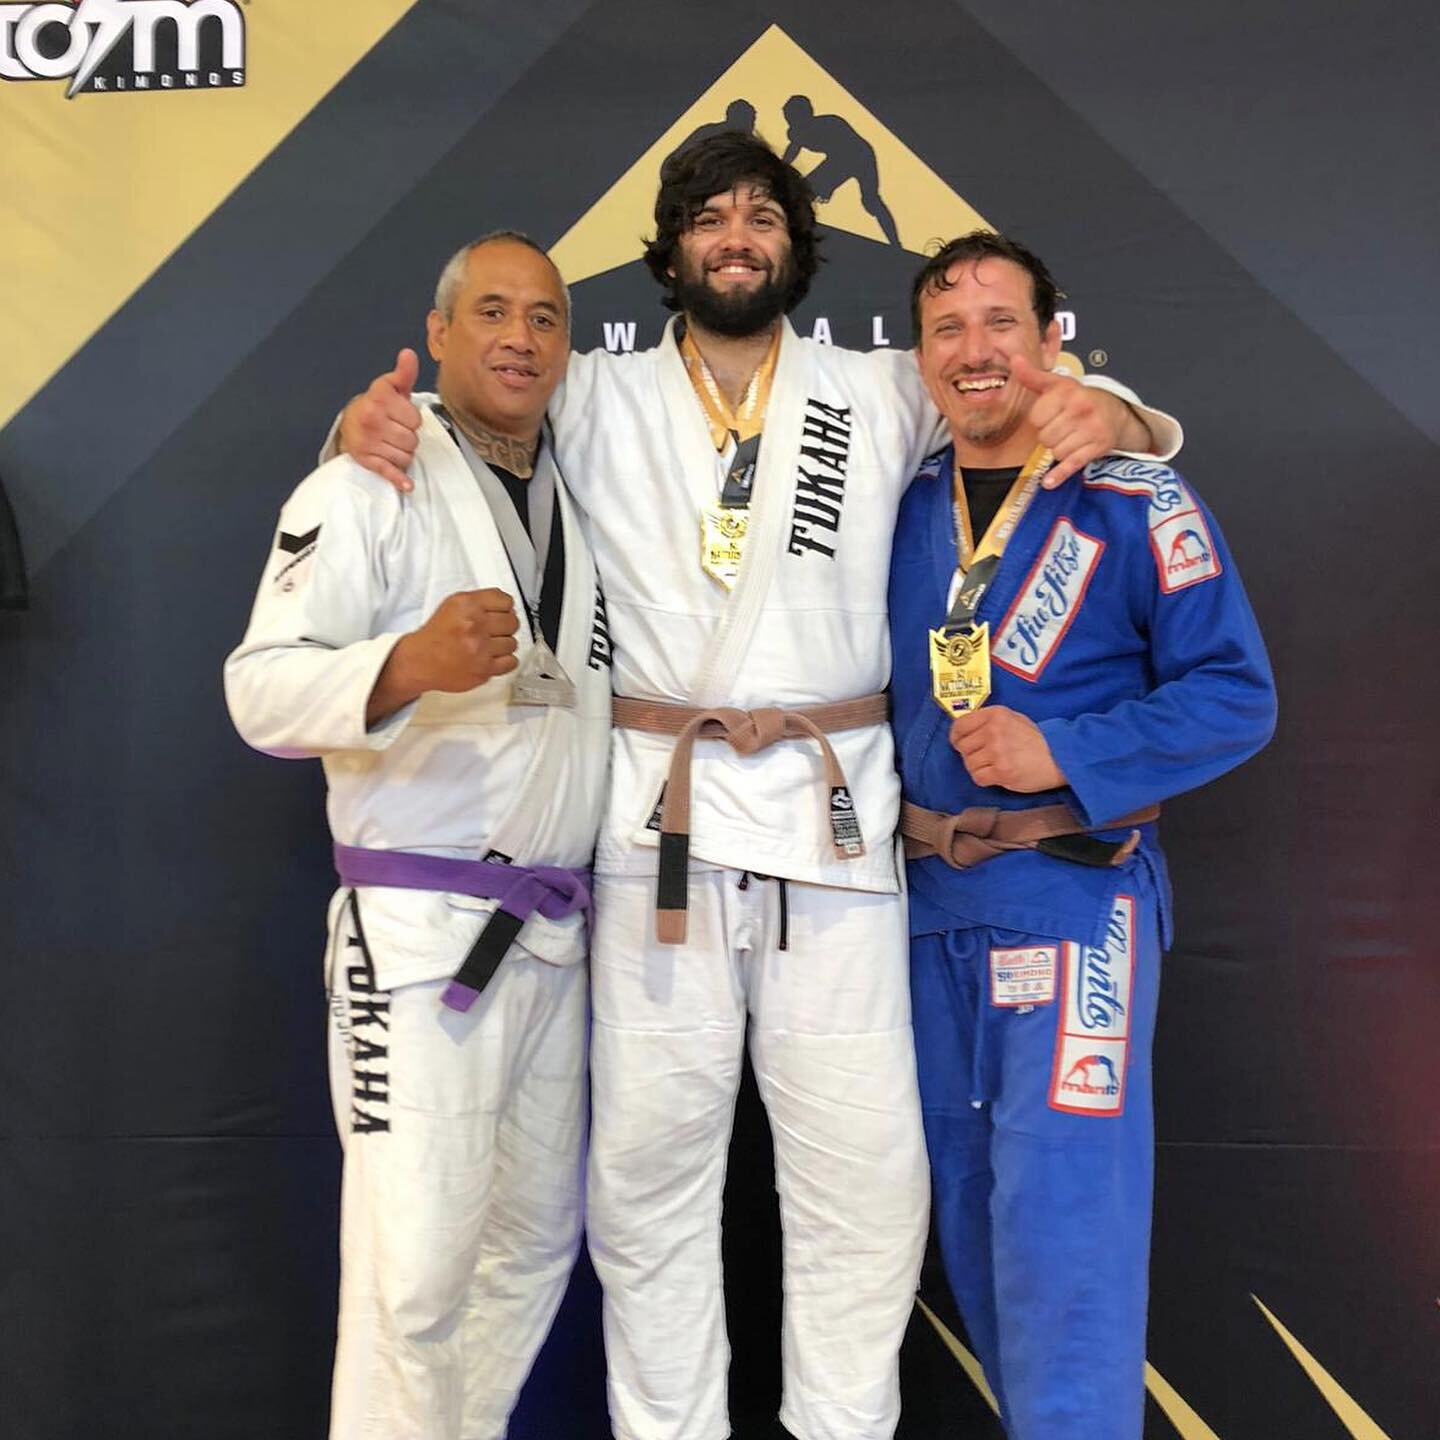 🥇Gold at BJJ NZ Nationals today! Yesterday was the anniversary of my Dads passing. Today&rsquo;s win is for him 💛 Thanks to my coaches Gareth @westsidejiujitsu.co.nz &amp; Pedro @tukahabjjnz 
And to my brother @daltinhoterere who took home double G